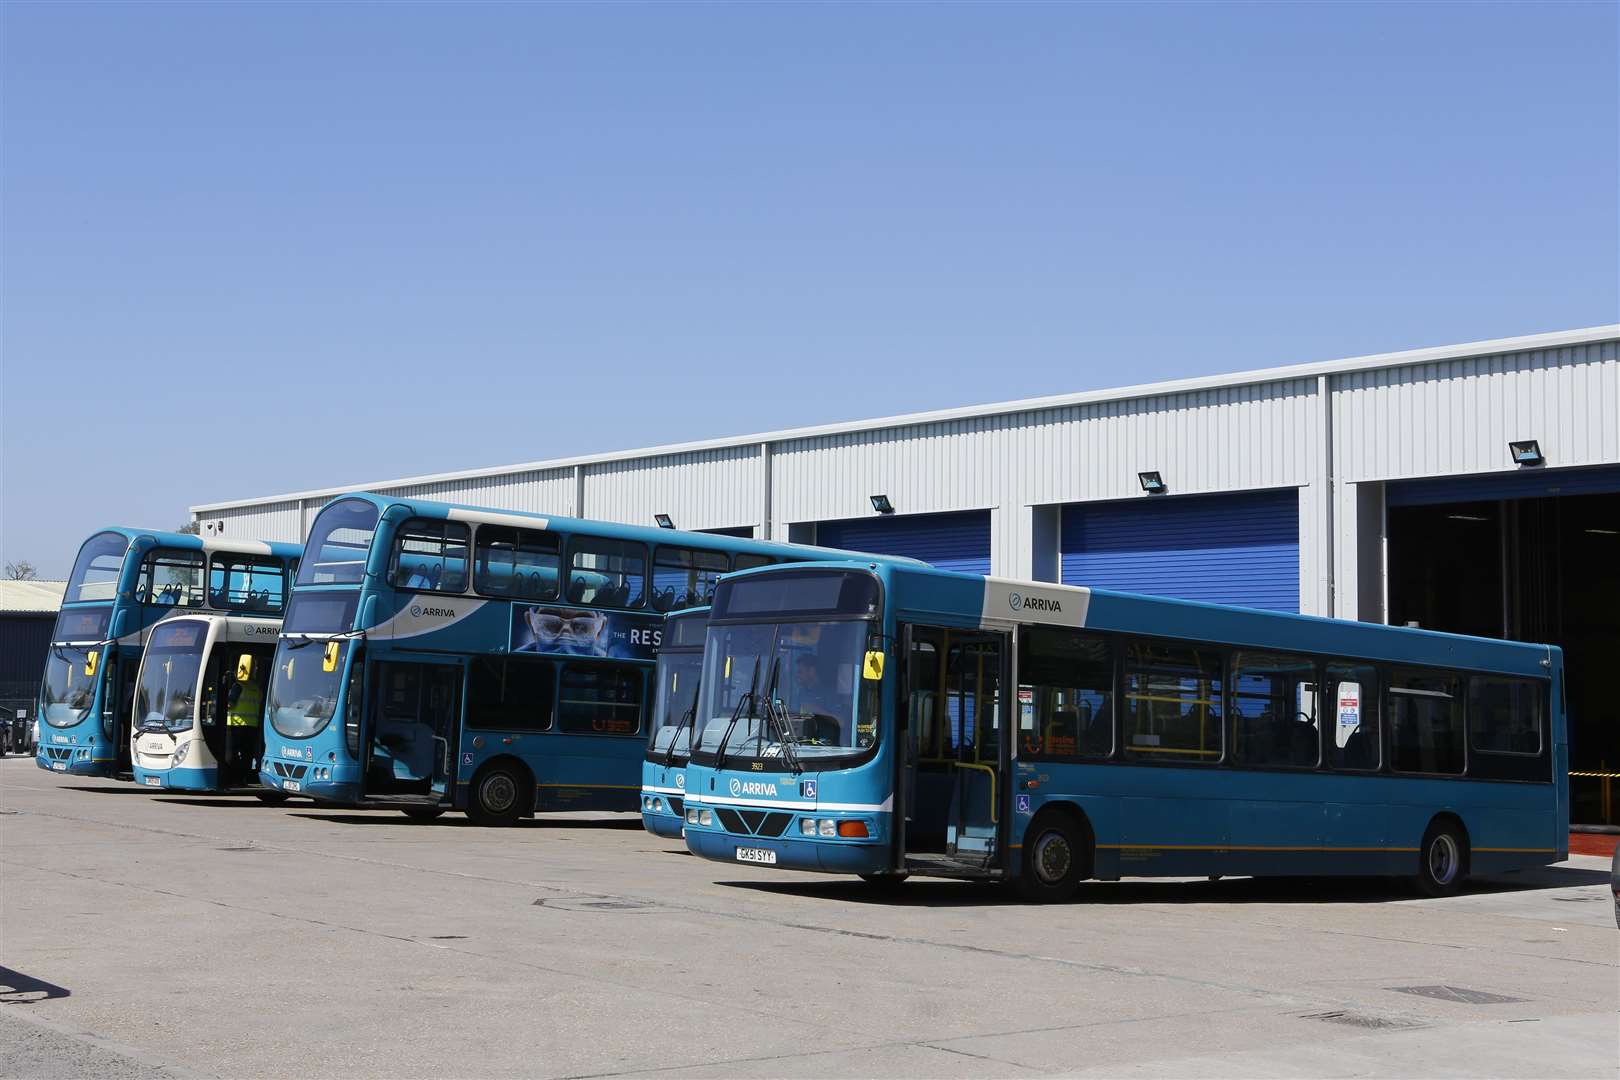 Arriva is changing its early morning timetable